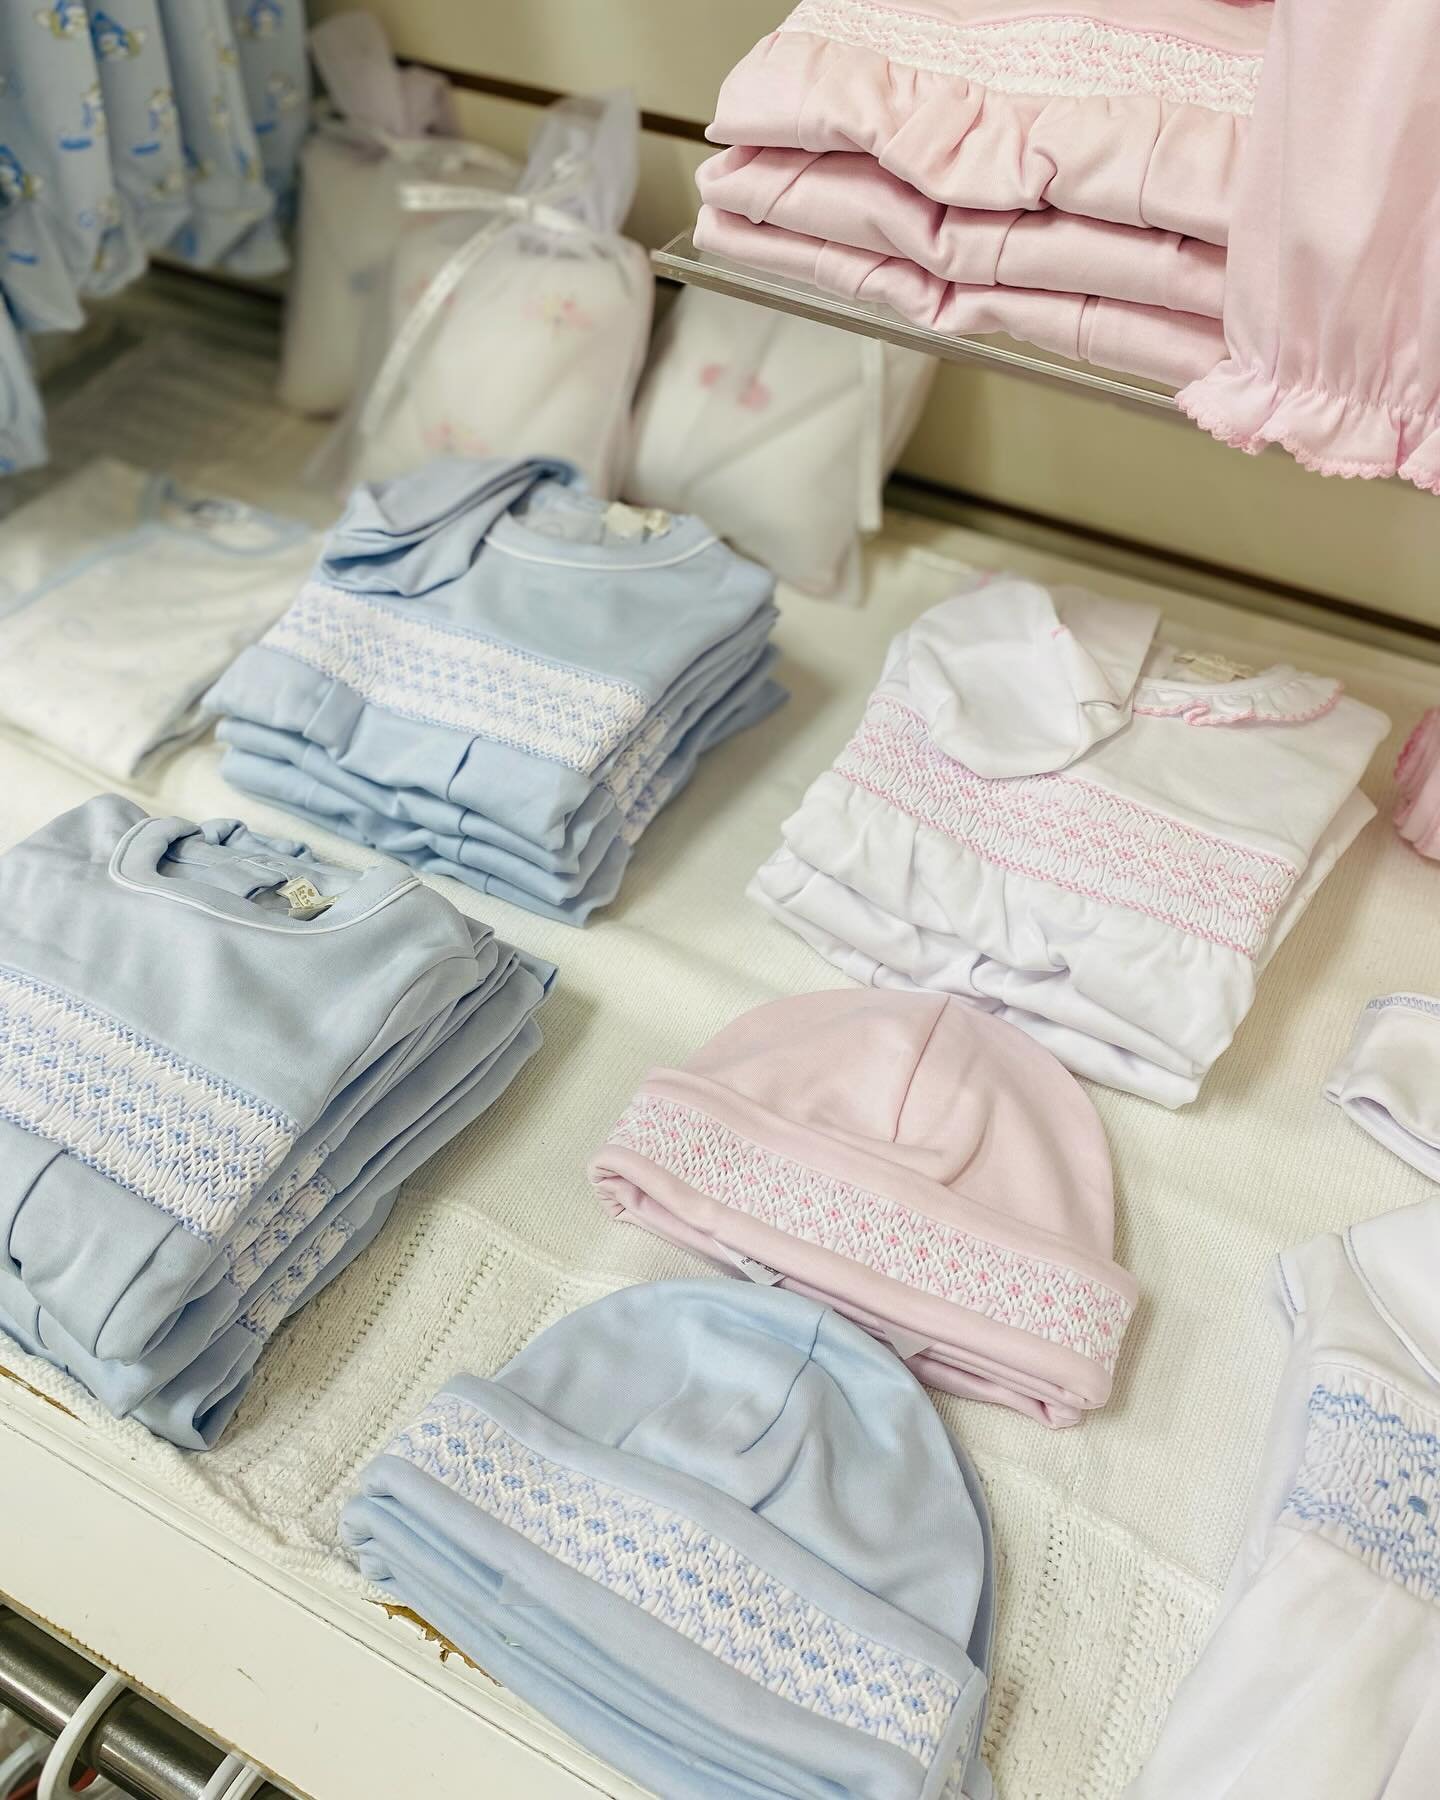 Beautiful new arrivals for your own &ldquo;new arrivals&rdquo;..
@kissykissy 🩶
.
.
#childrensshop #childrensshopatl #kissykissy #layette #babygowns #shopsmall